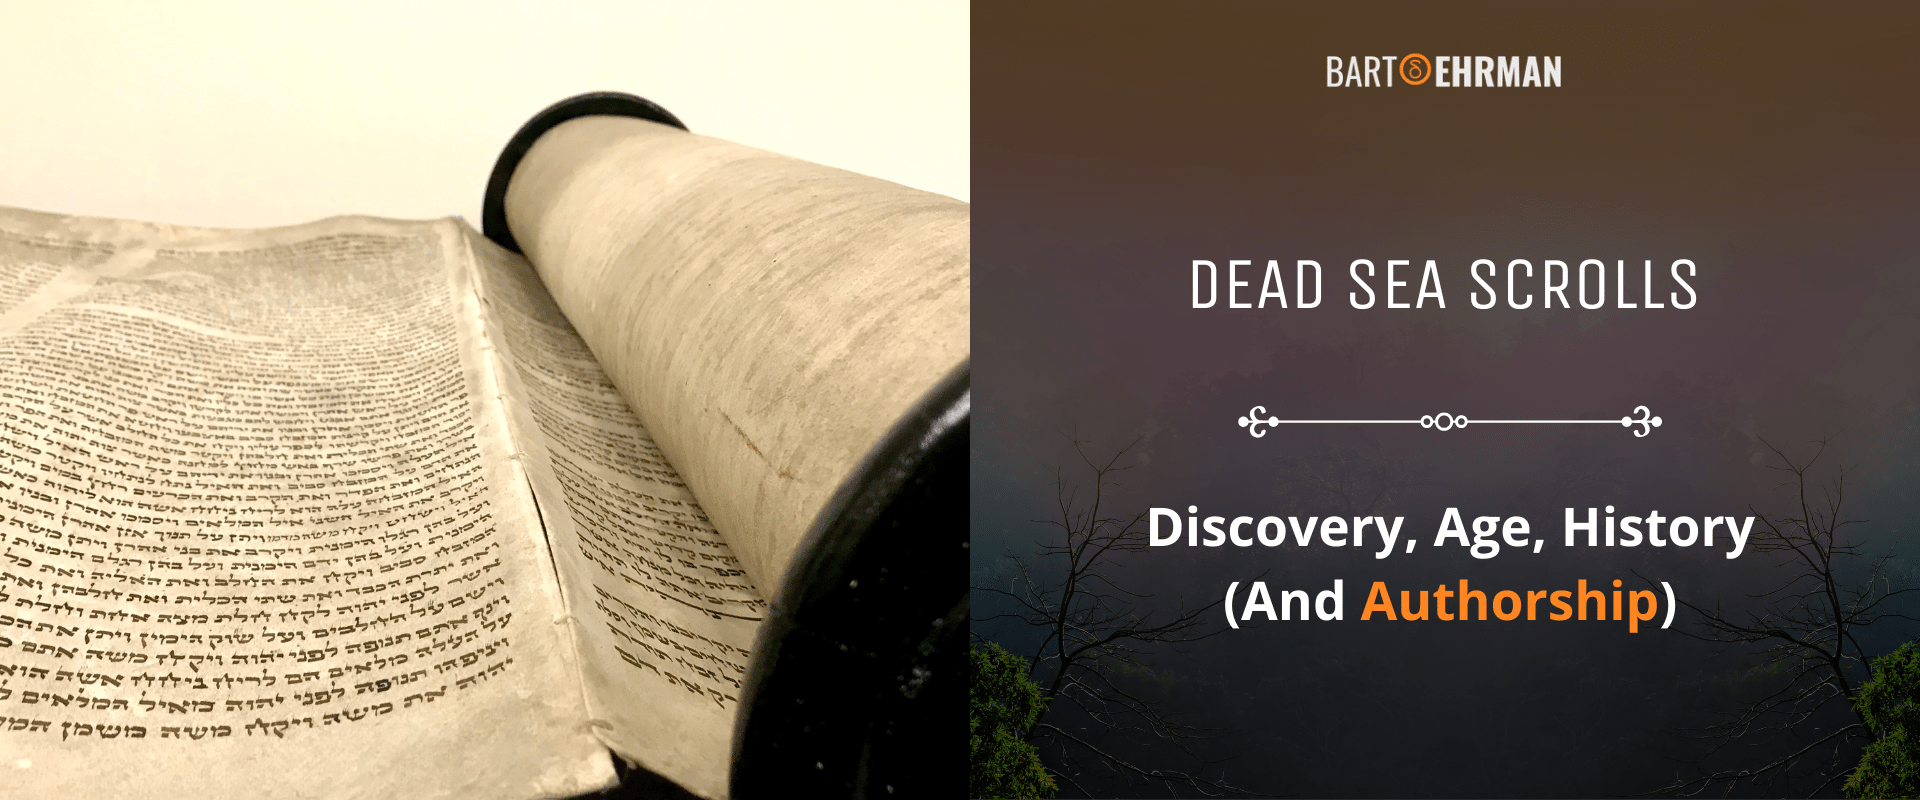 Dead Sea Scrolls - Discovery, Age, History And Authorship